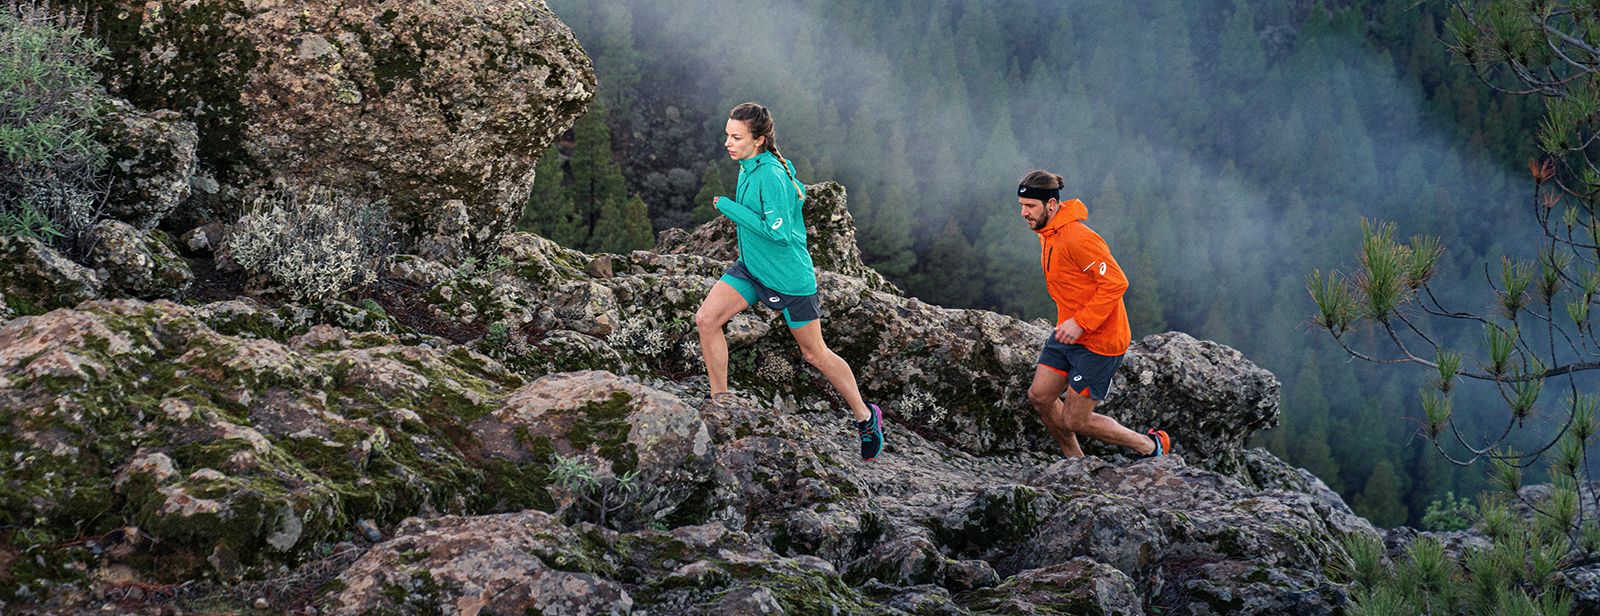 Trail Running Shoe Guide: Find Your Shoe | ASICS UK